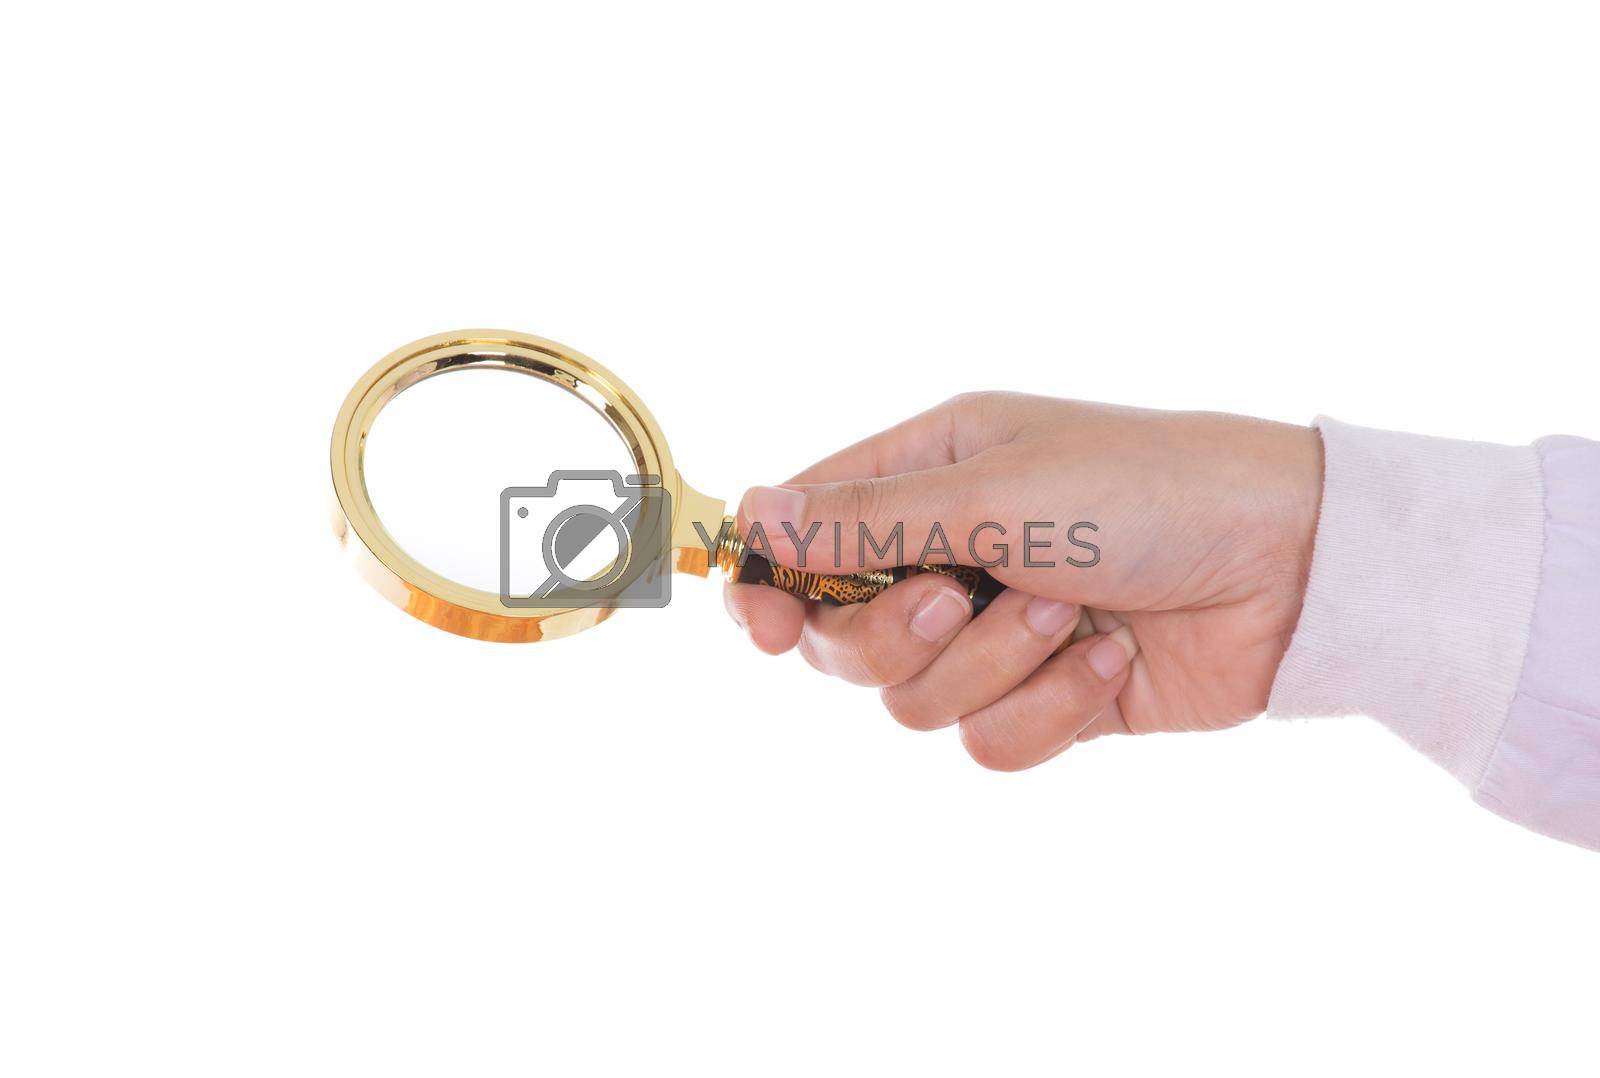 Royalty free image of hand holding a Brass Magnifying Glas by geargodz